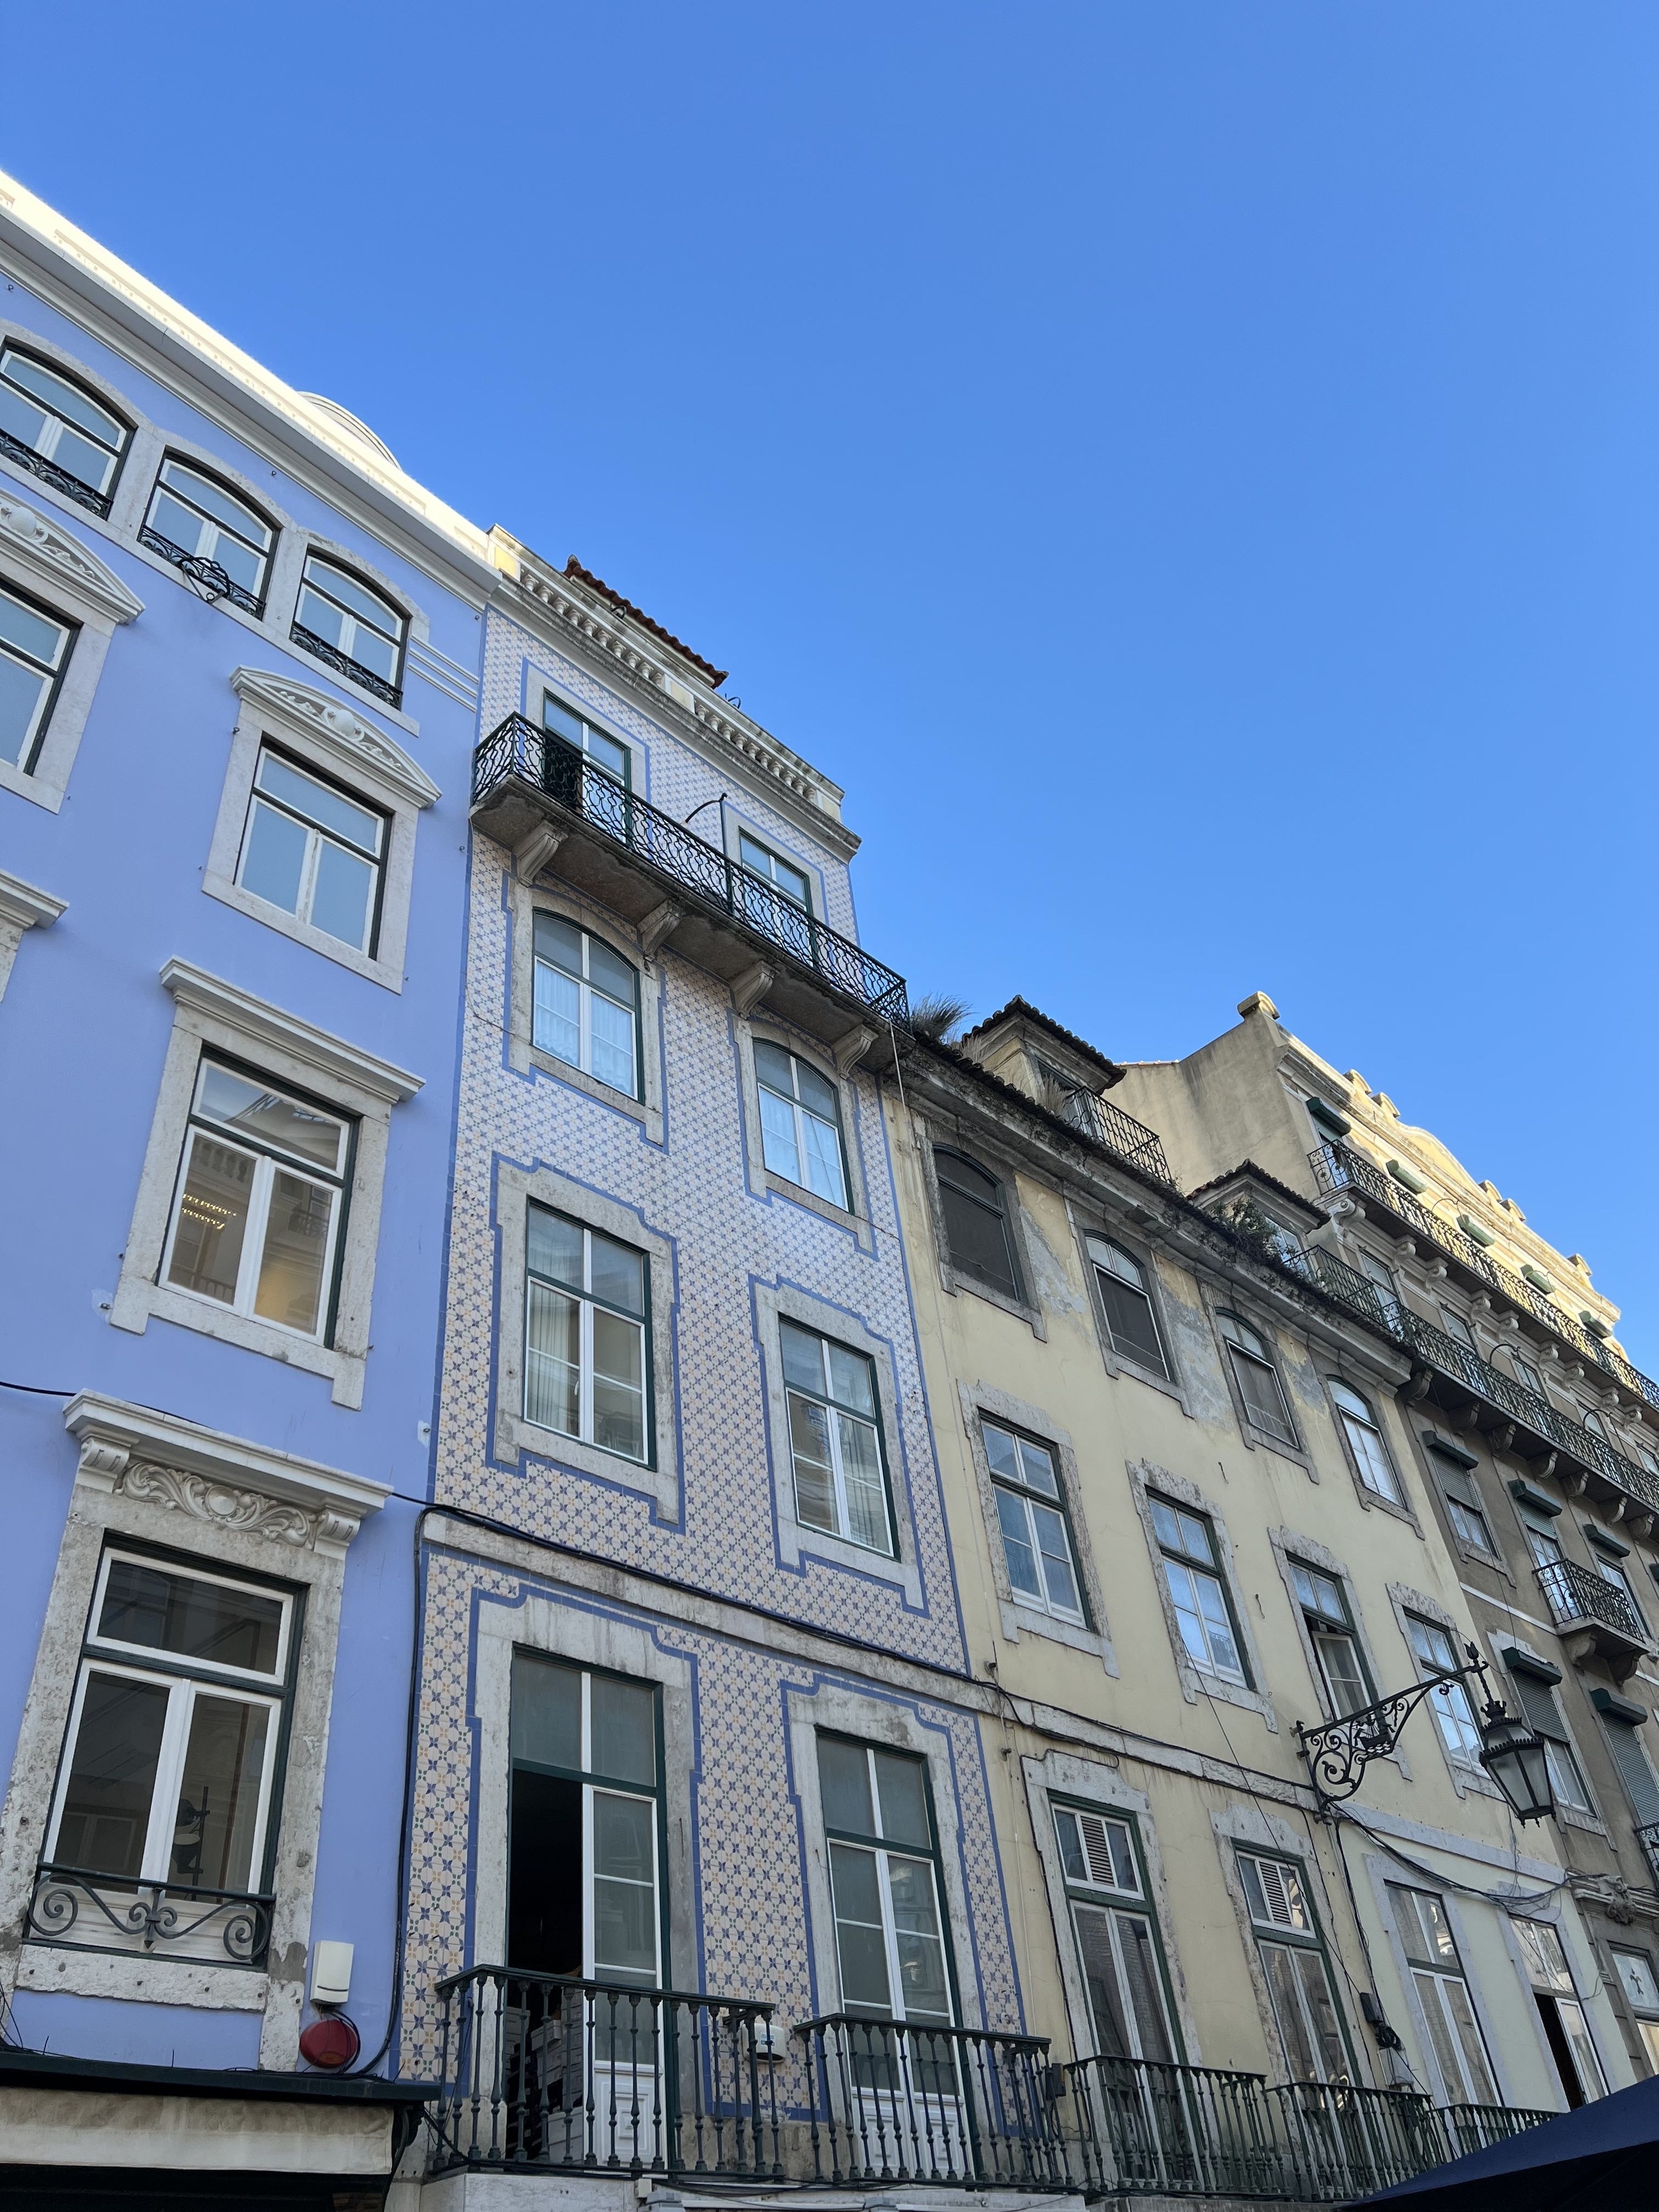 a street block in Lisbon with pastel colored buildings and tiles